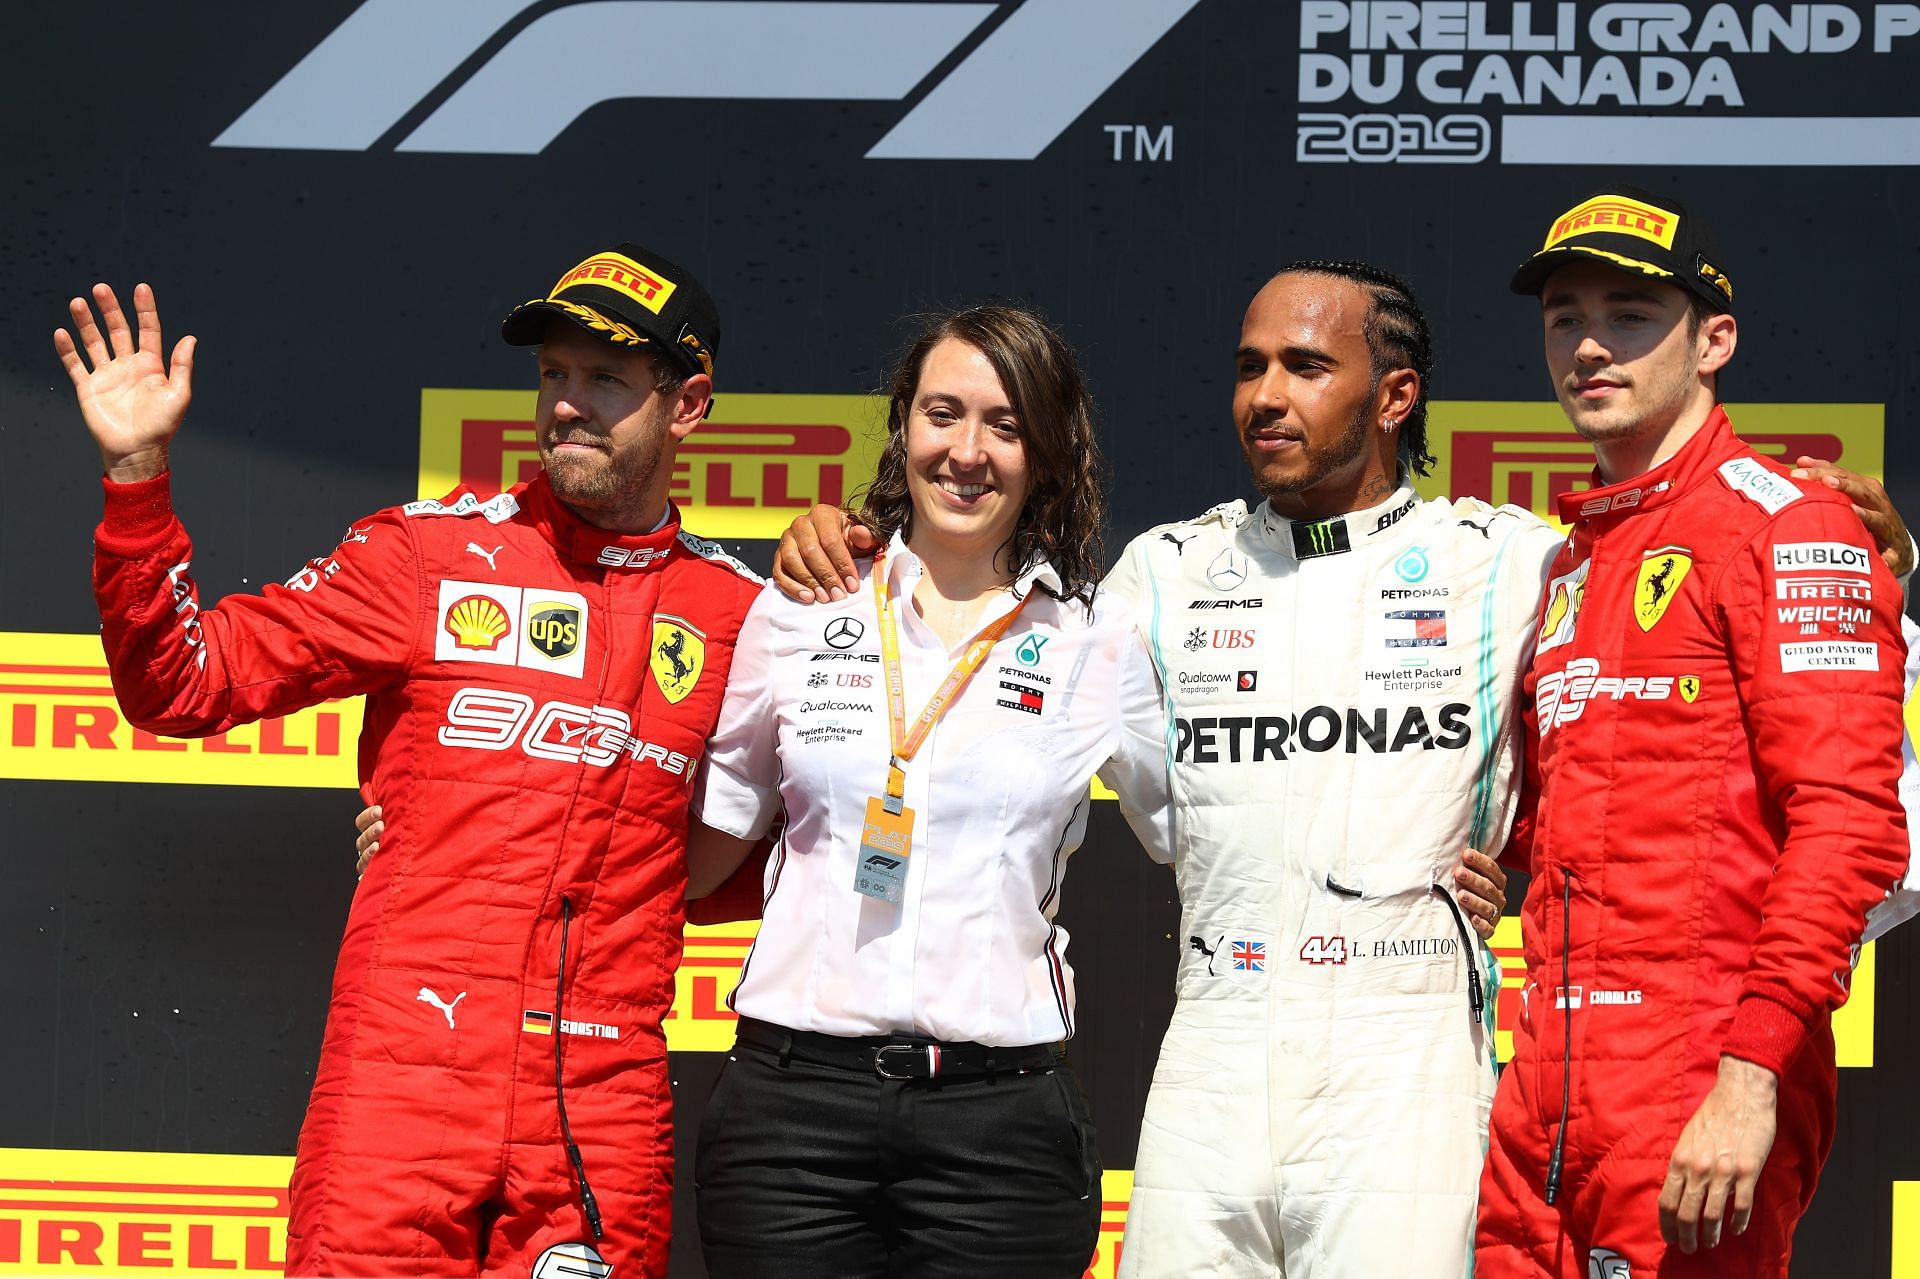 Margarita Torres Diez celebrates with Lewis Hamilton (C), Sebastian Vettel (L), and Charles Leclerc (R) on the podium during the F1 Grand Prix of Canada at Circuit Gilles Villeneuve on June 09, 2019, in Montreal, Canada (Photo by Mark Thompson/Getty Images)